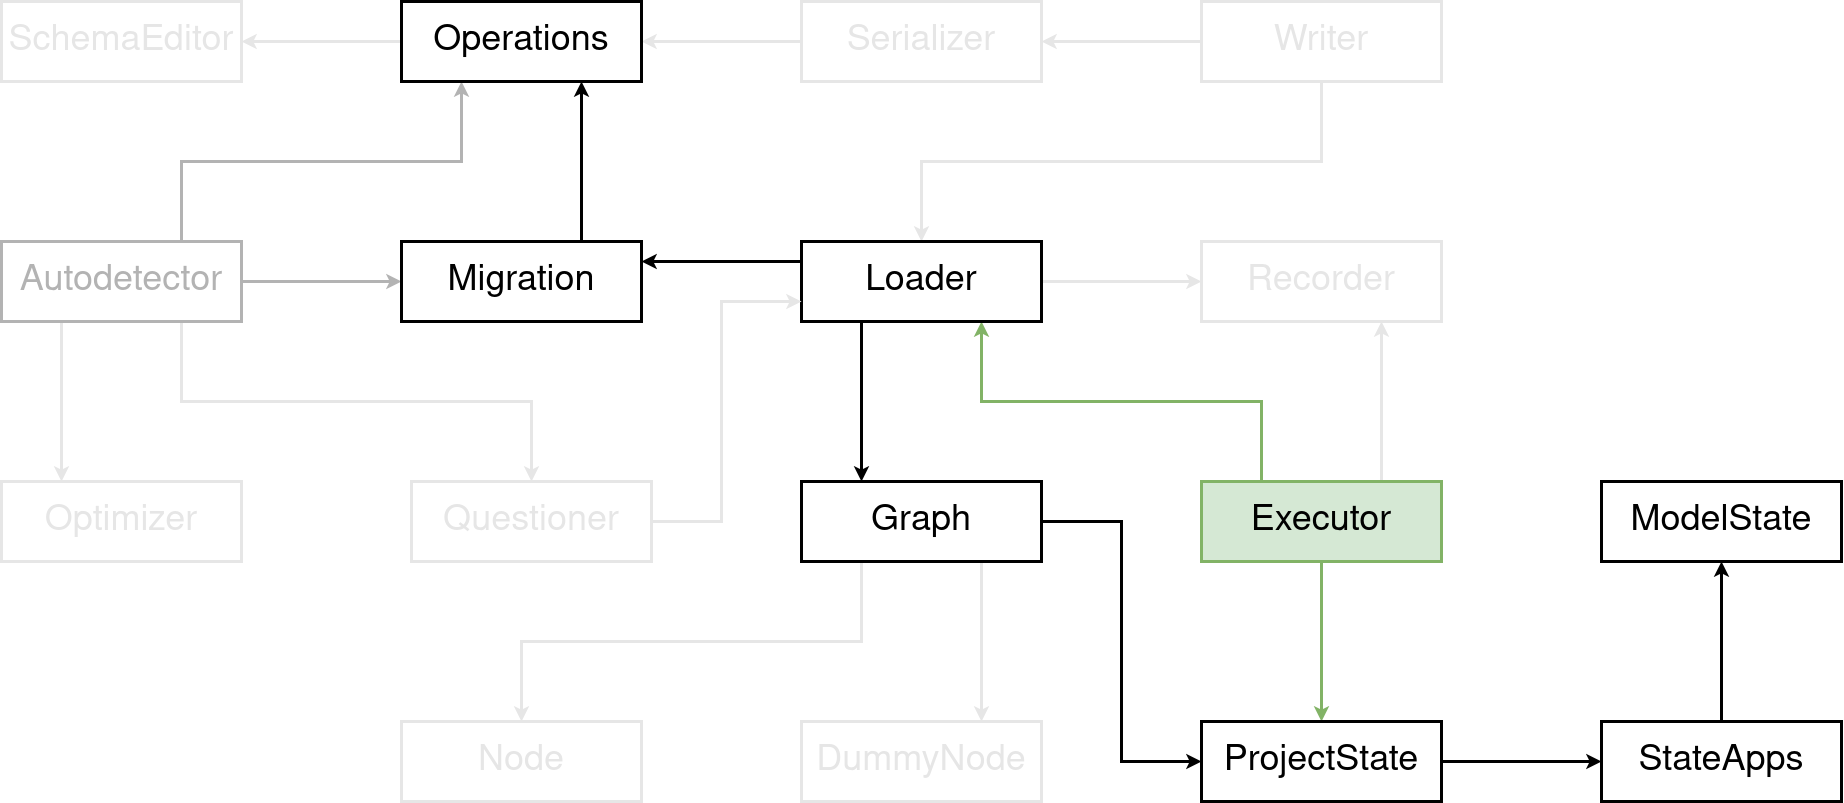 Highlighted the executor component in the diagram